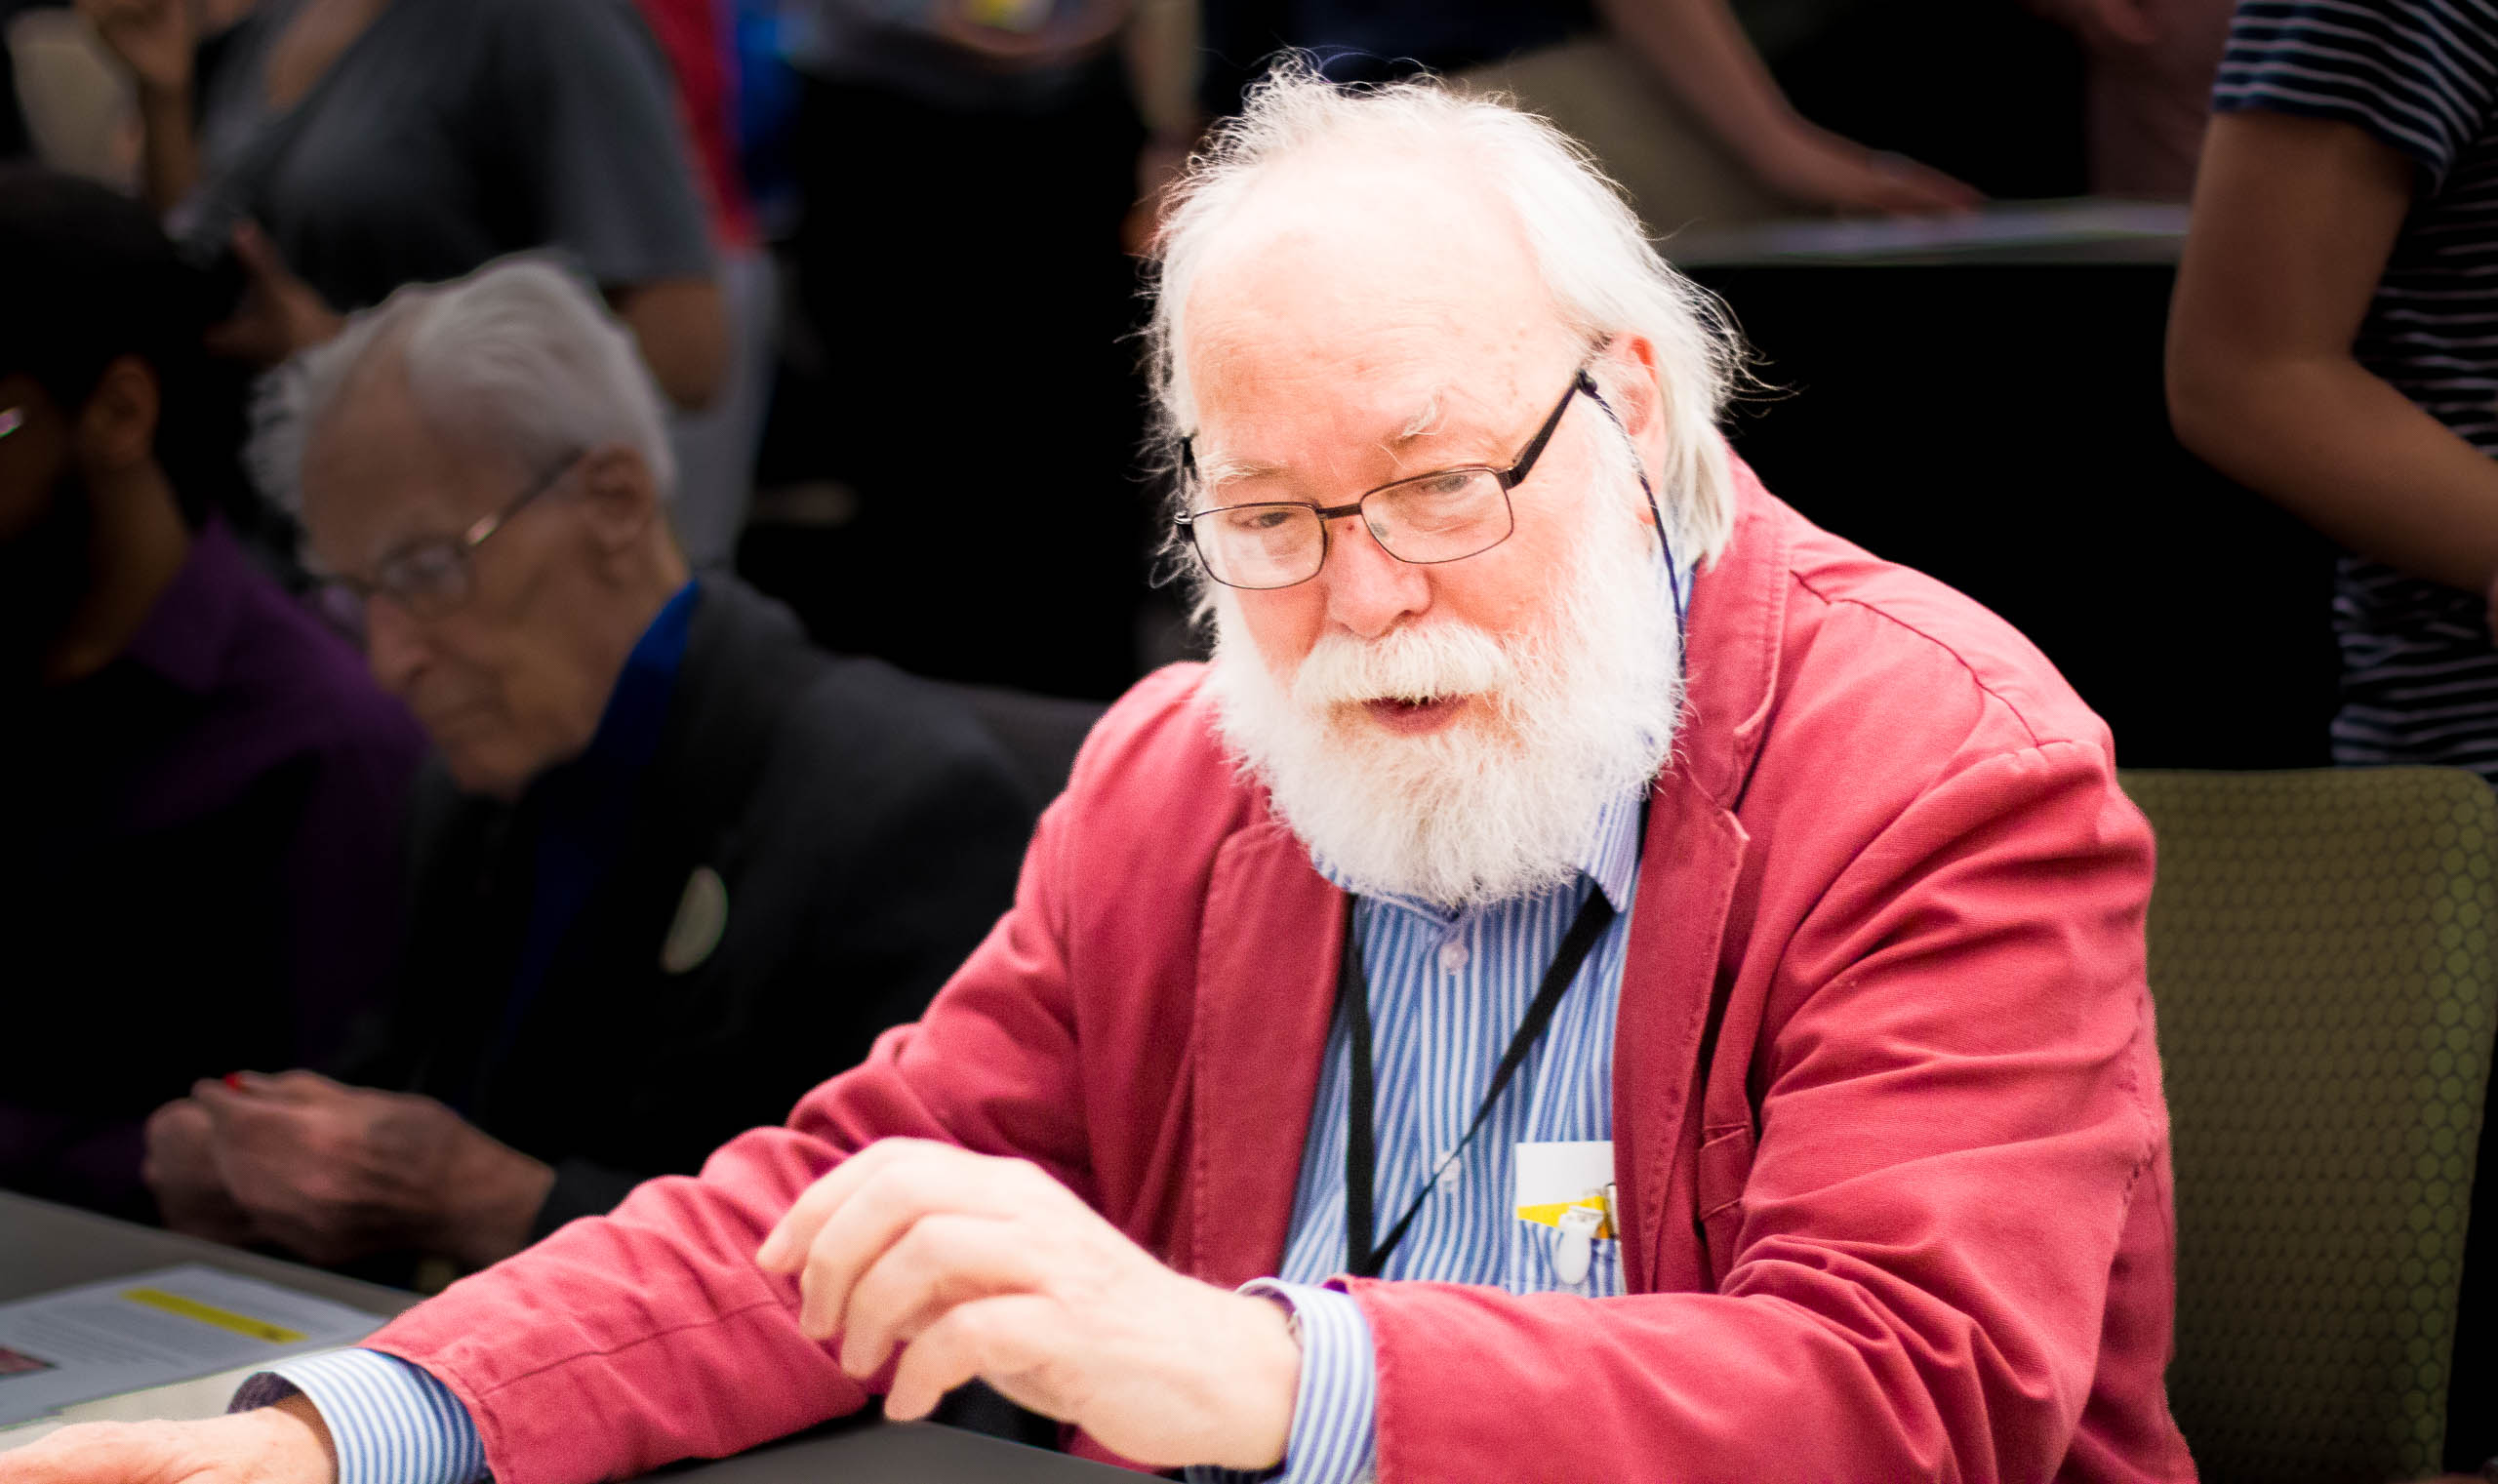 A photo of David Singmaster at a conference, looking curiously at something on a table. Richard Guy in the background on the left.